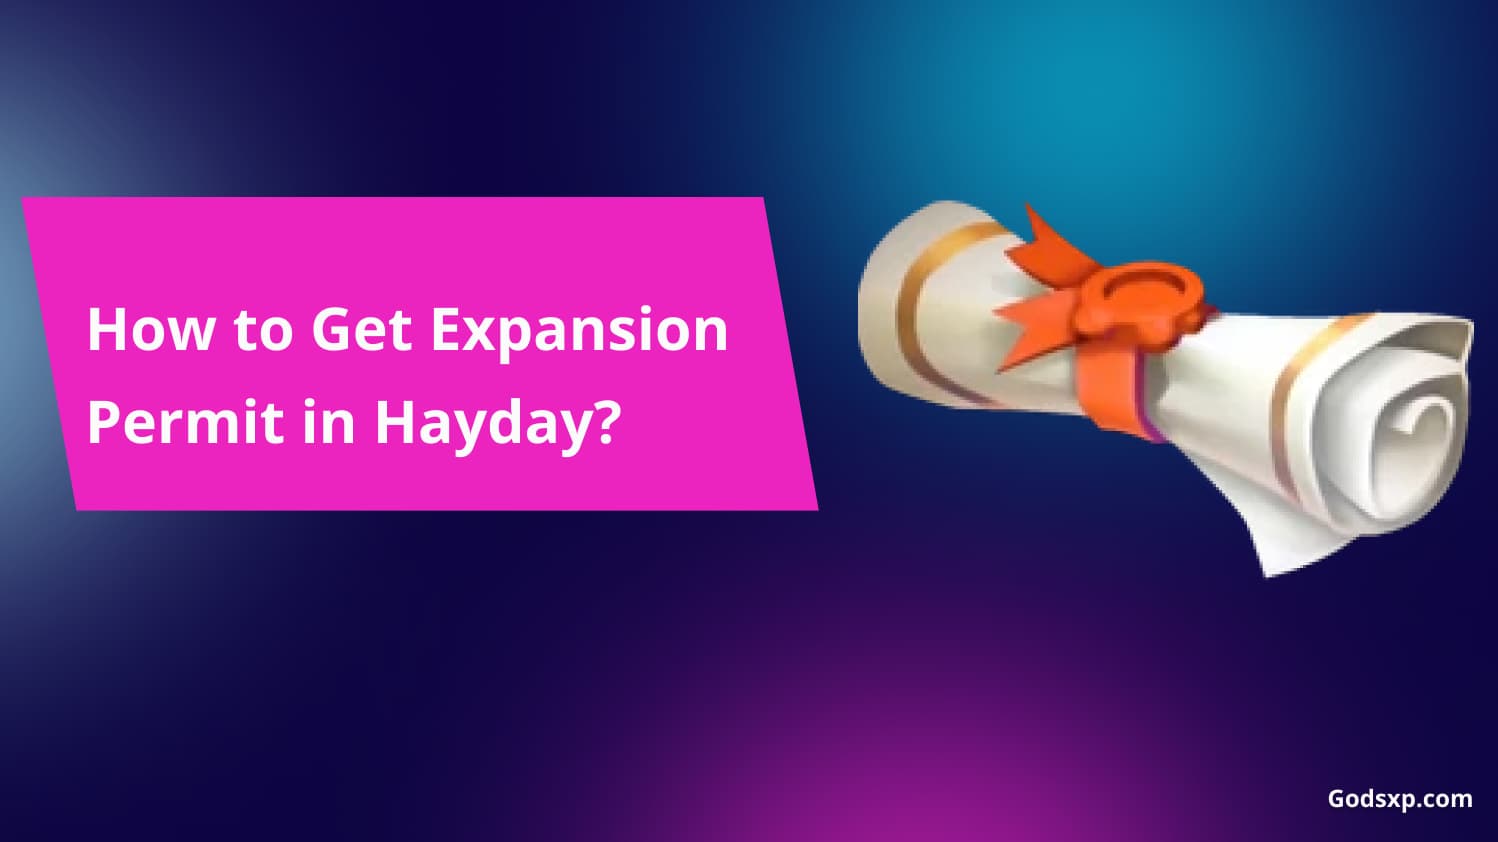 How to Get Expansion Permit in Hayday